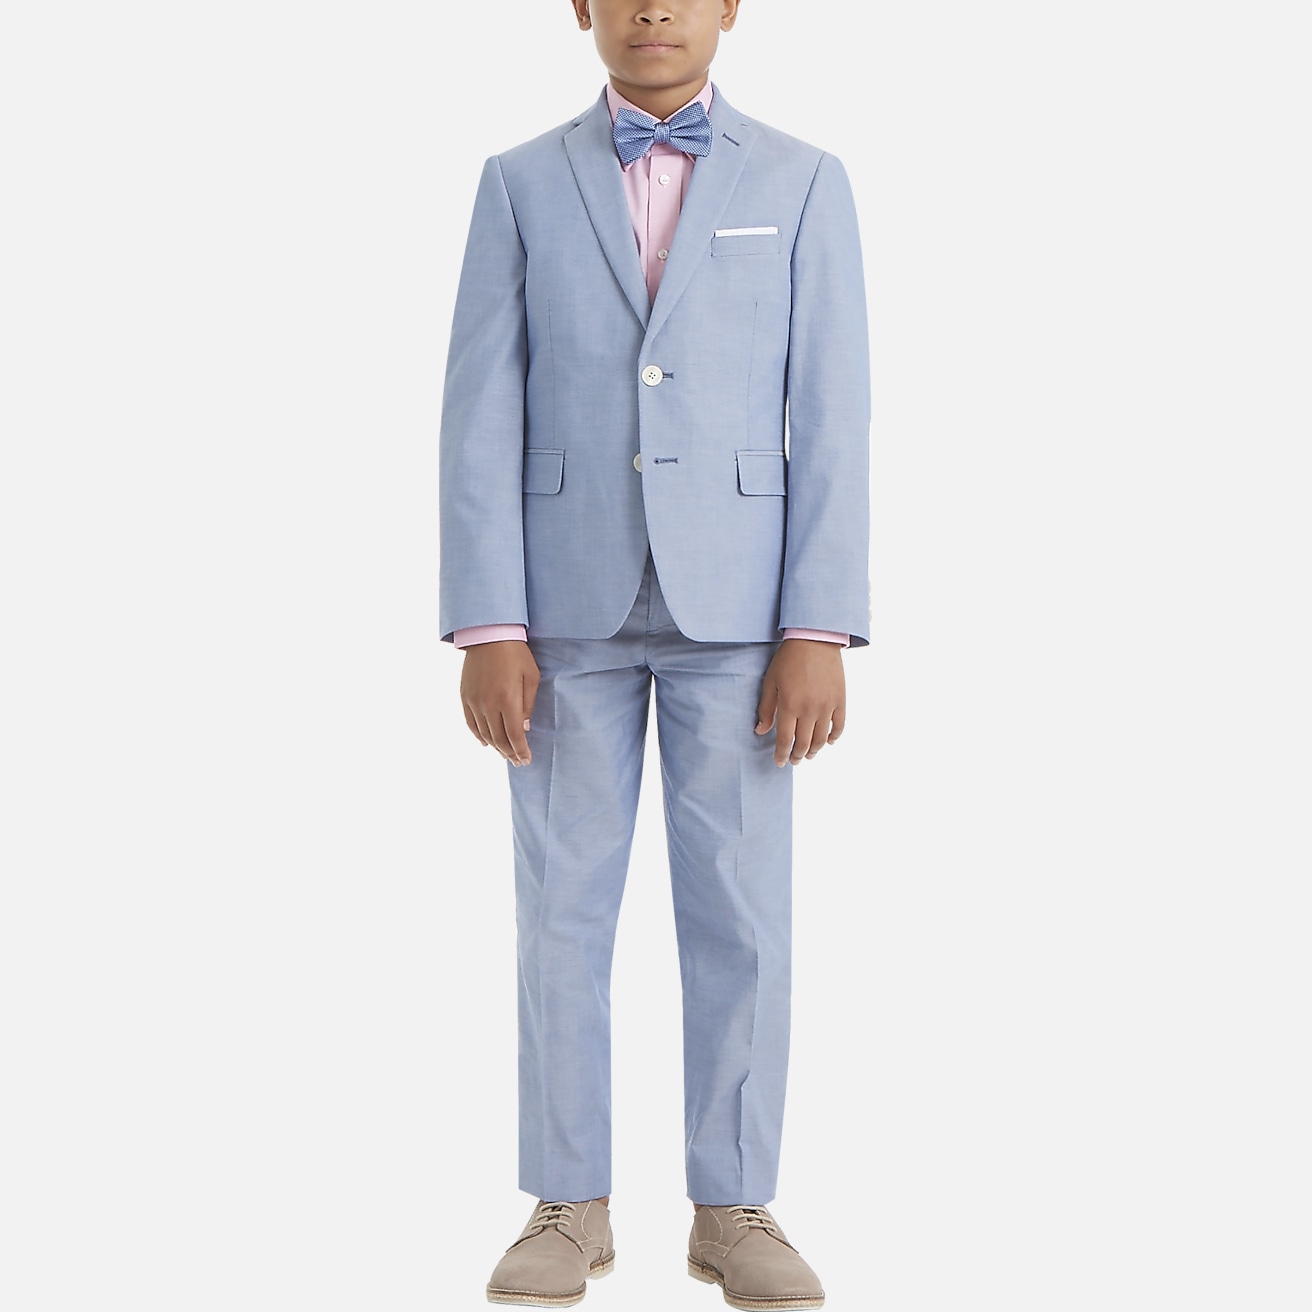 https://image.menswearhouse.com/is/image/TMW/TMW_3VG0_48_LAUREN_BY_RALPH_LAUREN_BOYS_SUITS_SEPARATES_LIGHT_BLUE_CHAMBRAY_MAIN?imPolicy=pdp-mob-2x